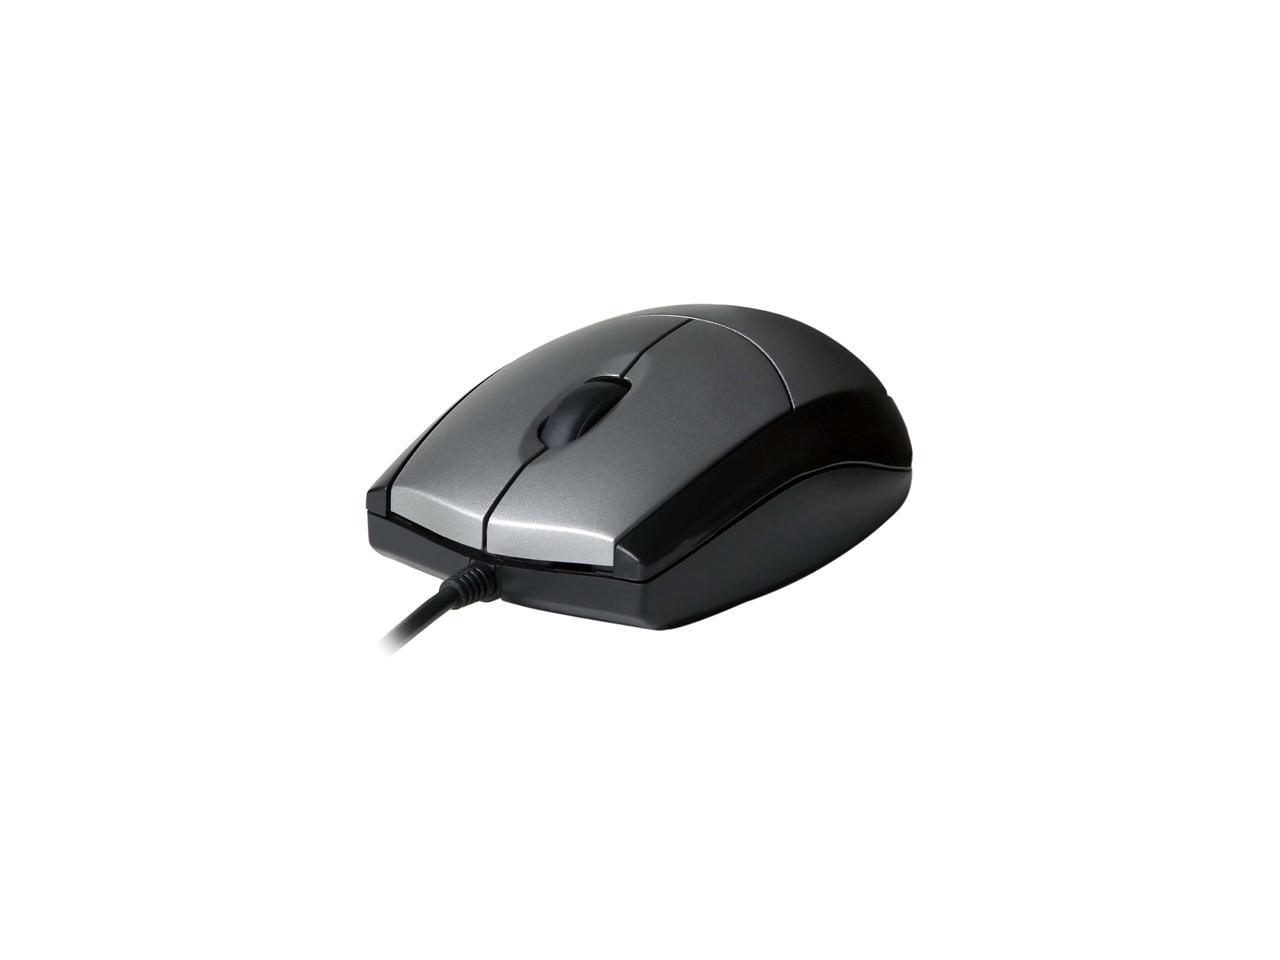 V7 Full size USB Optical Mouse MV3000010-5NC Silver/Black 3 Buttons 1 x Wheel USB Wired Optical 1000 dpi Mouse